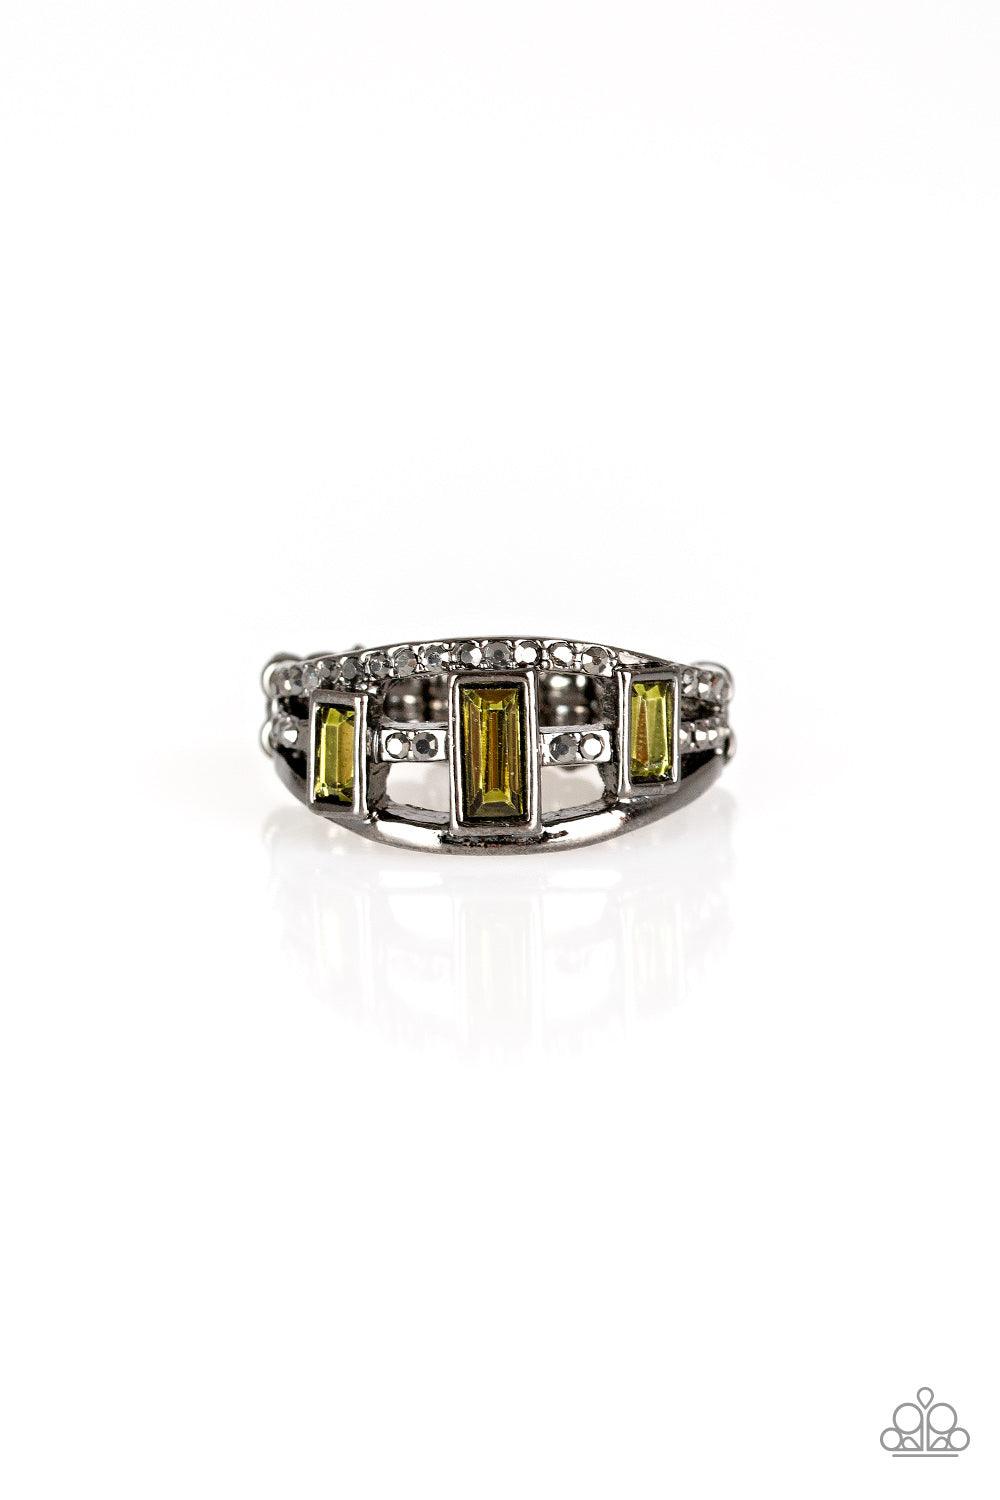 Paparazzi Accessories Noble Nova - Green Three green emerald-cut rhinestones are encrusted along three gunmetal bands radiating with smooth surfaces and sections of glittery hematite rhinestones for an edgy fashion. Features a stretchy band for a flexible